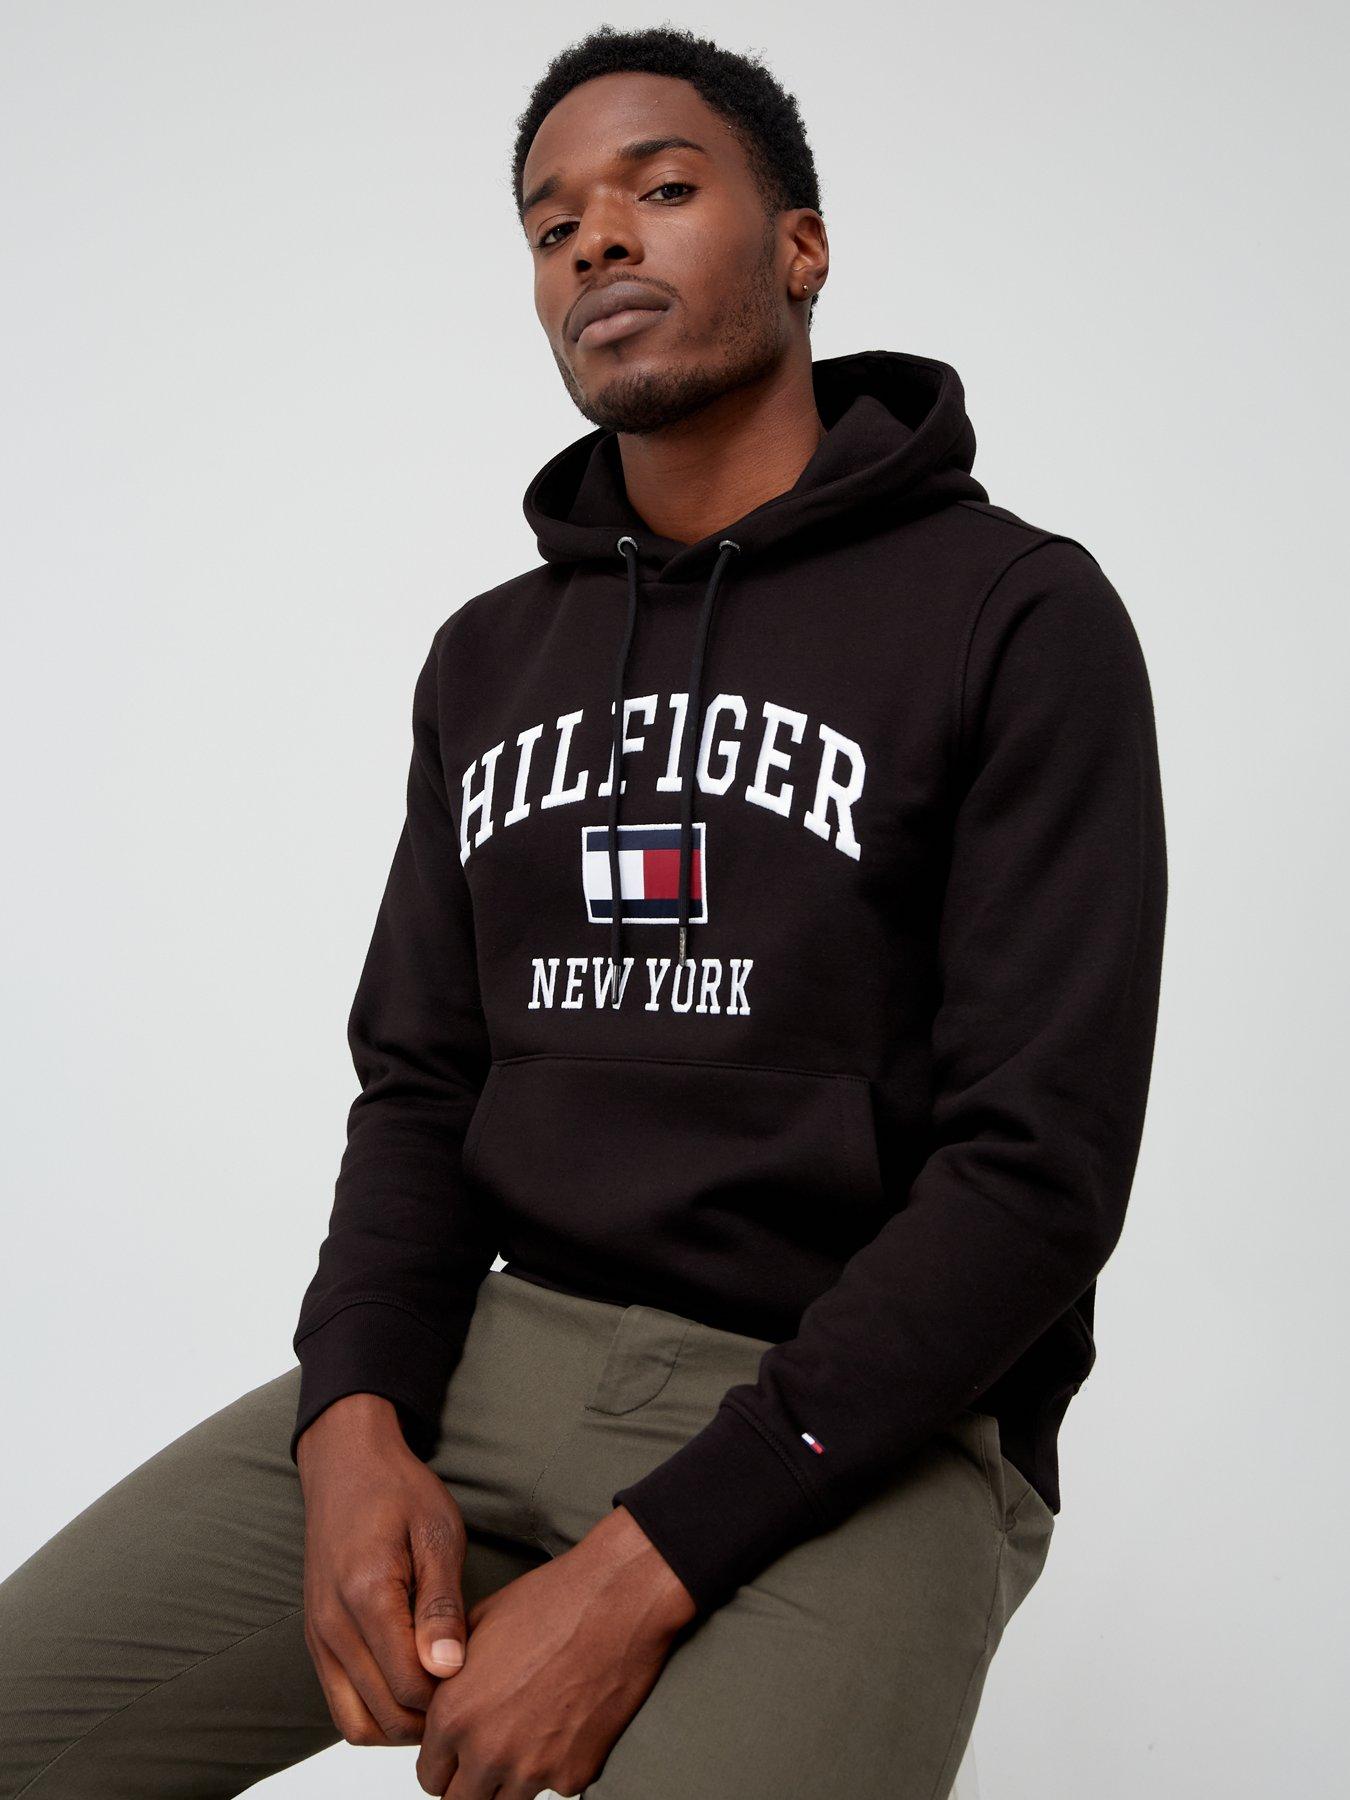 gym and workout clothes Sweatshirts Mens Clothing Activewear Tommy Hilfiger Fleece Sweatshirt in Black for Men 